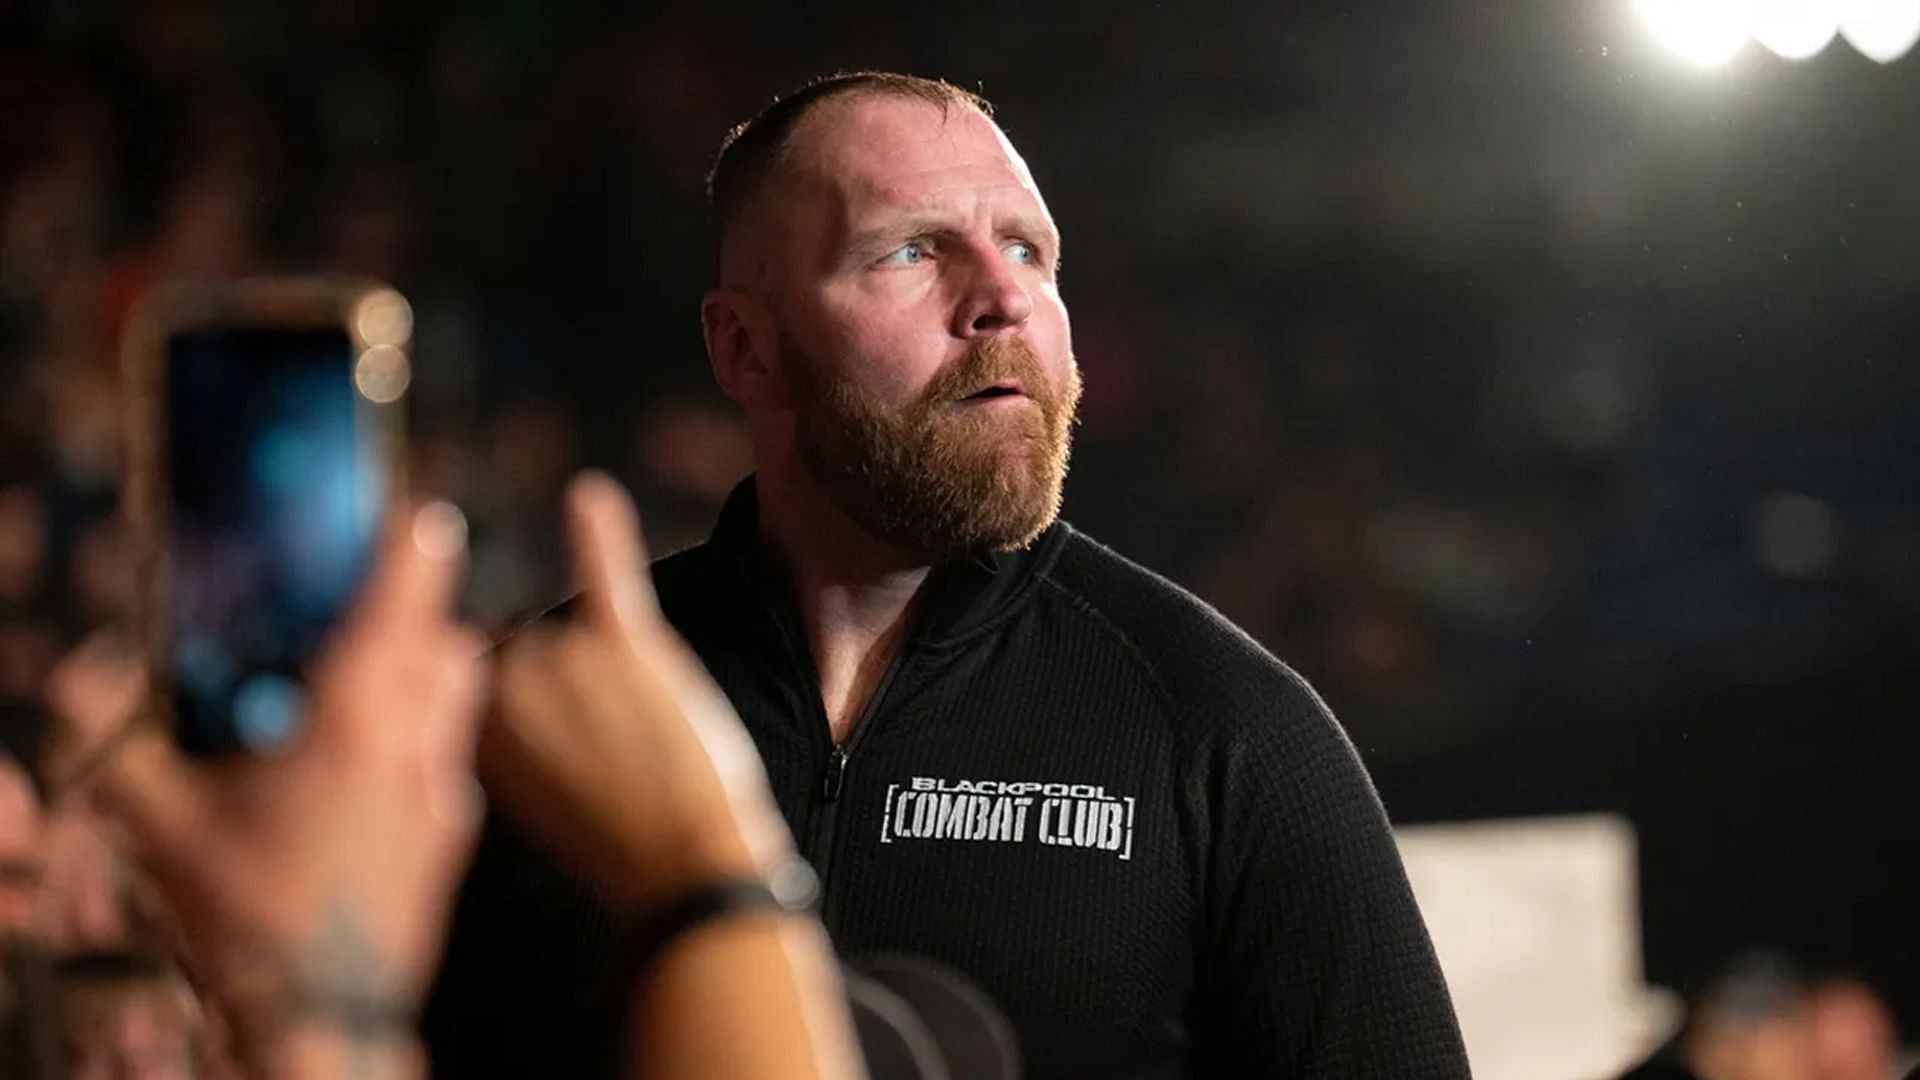 Moxley has been announced as a participant in the Continental Classic